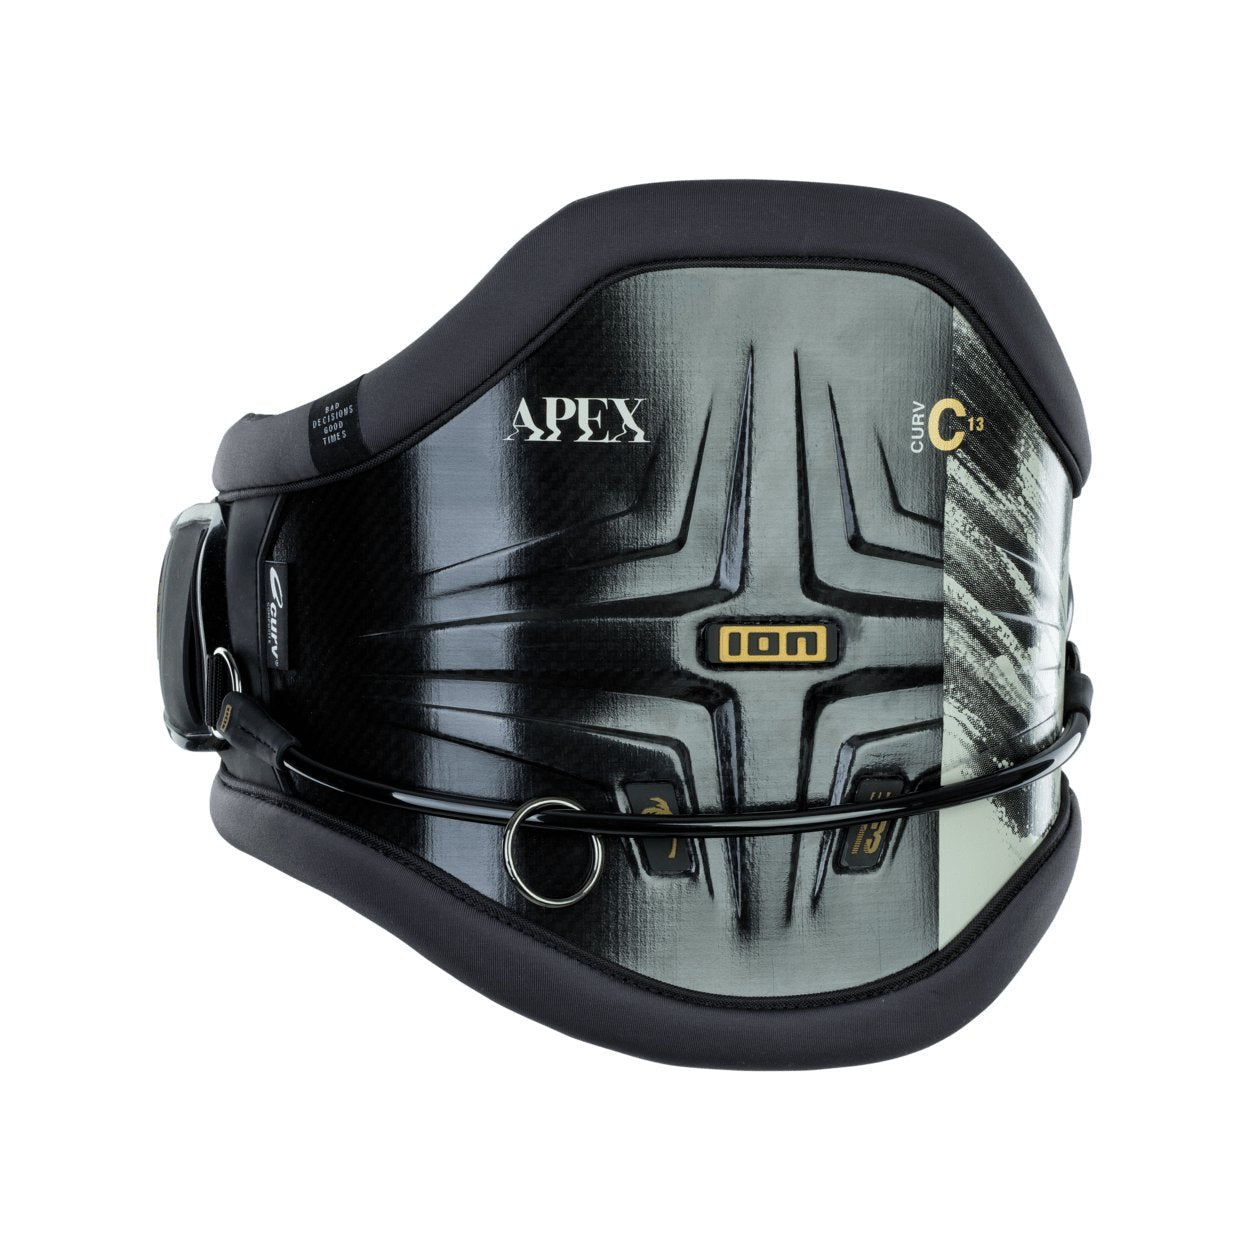 ION Apex Curv 13 2021 - Worthing Watersports - 9008415943234 - Harness - ION Water